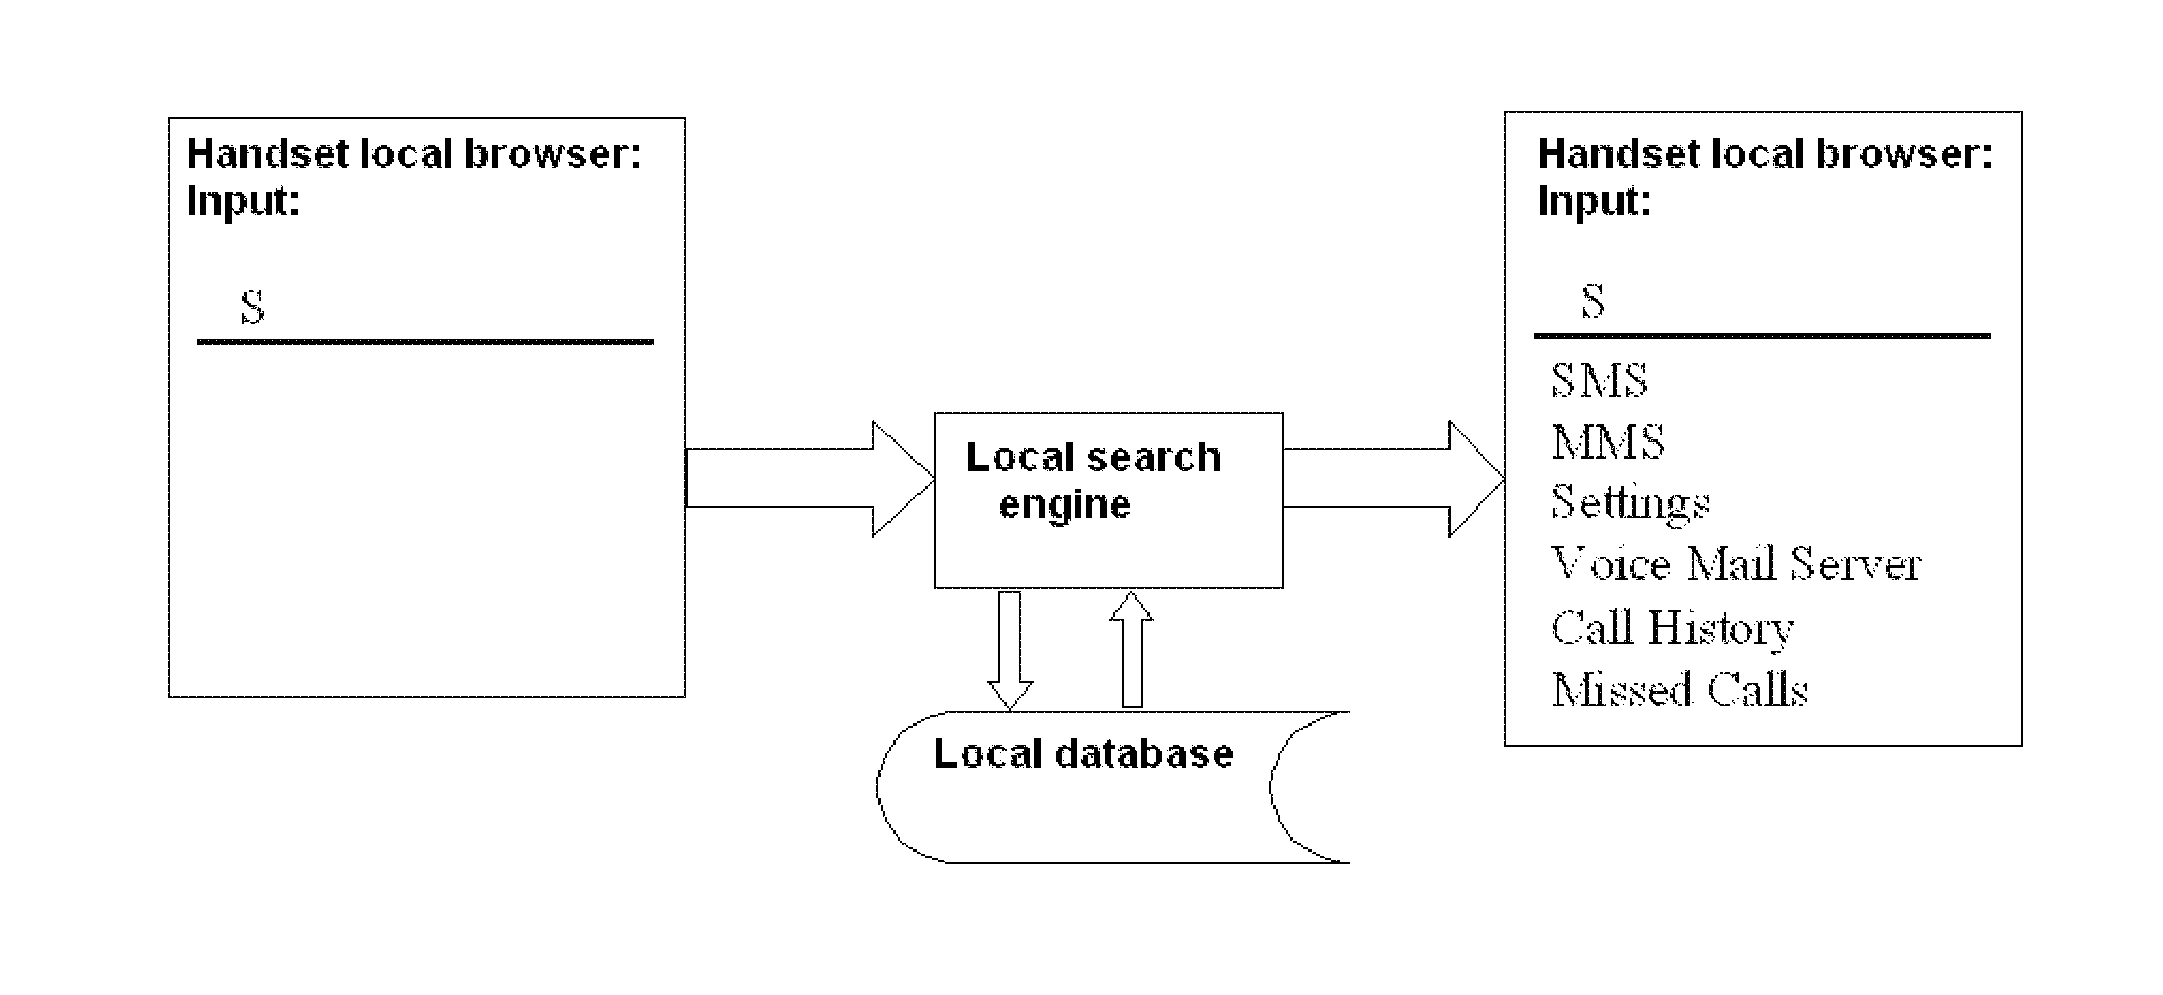 Local search method for handset